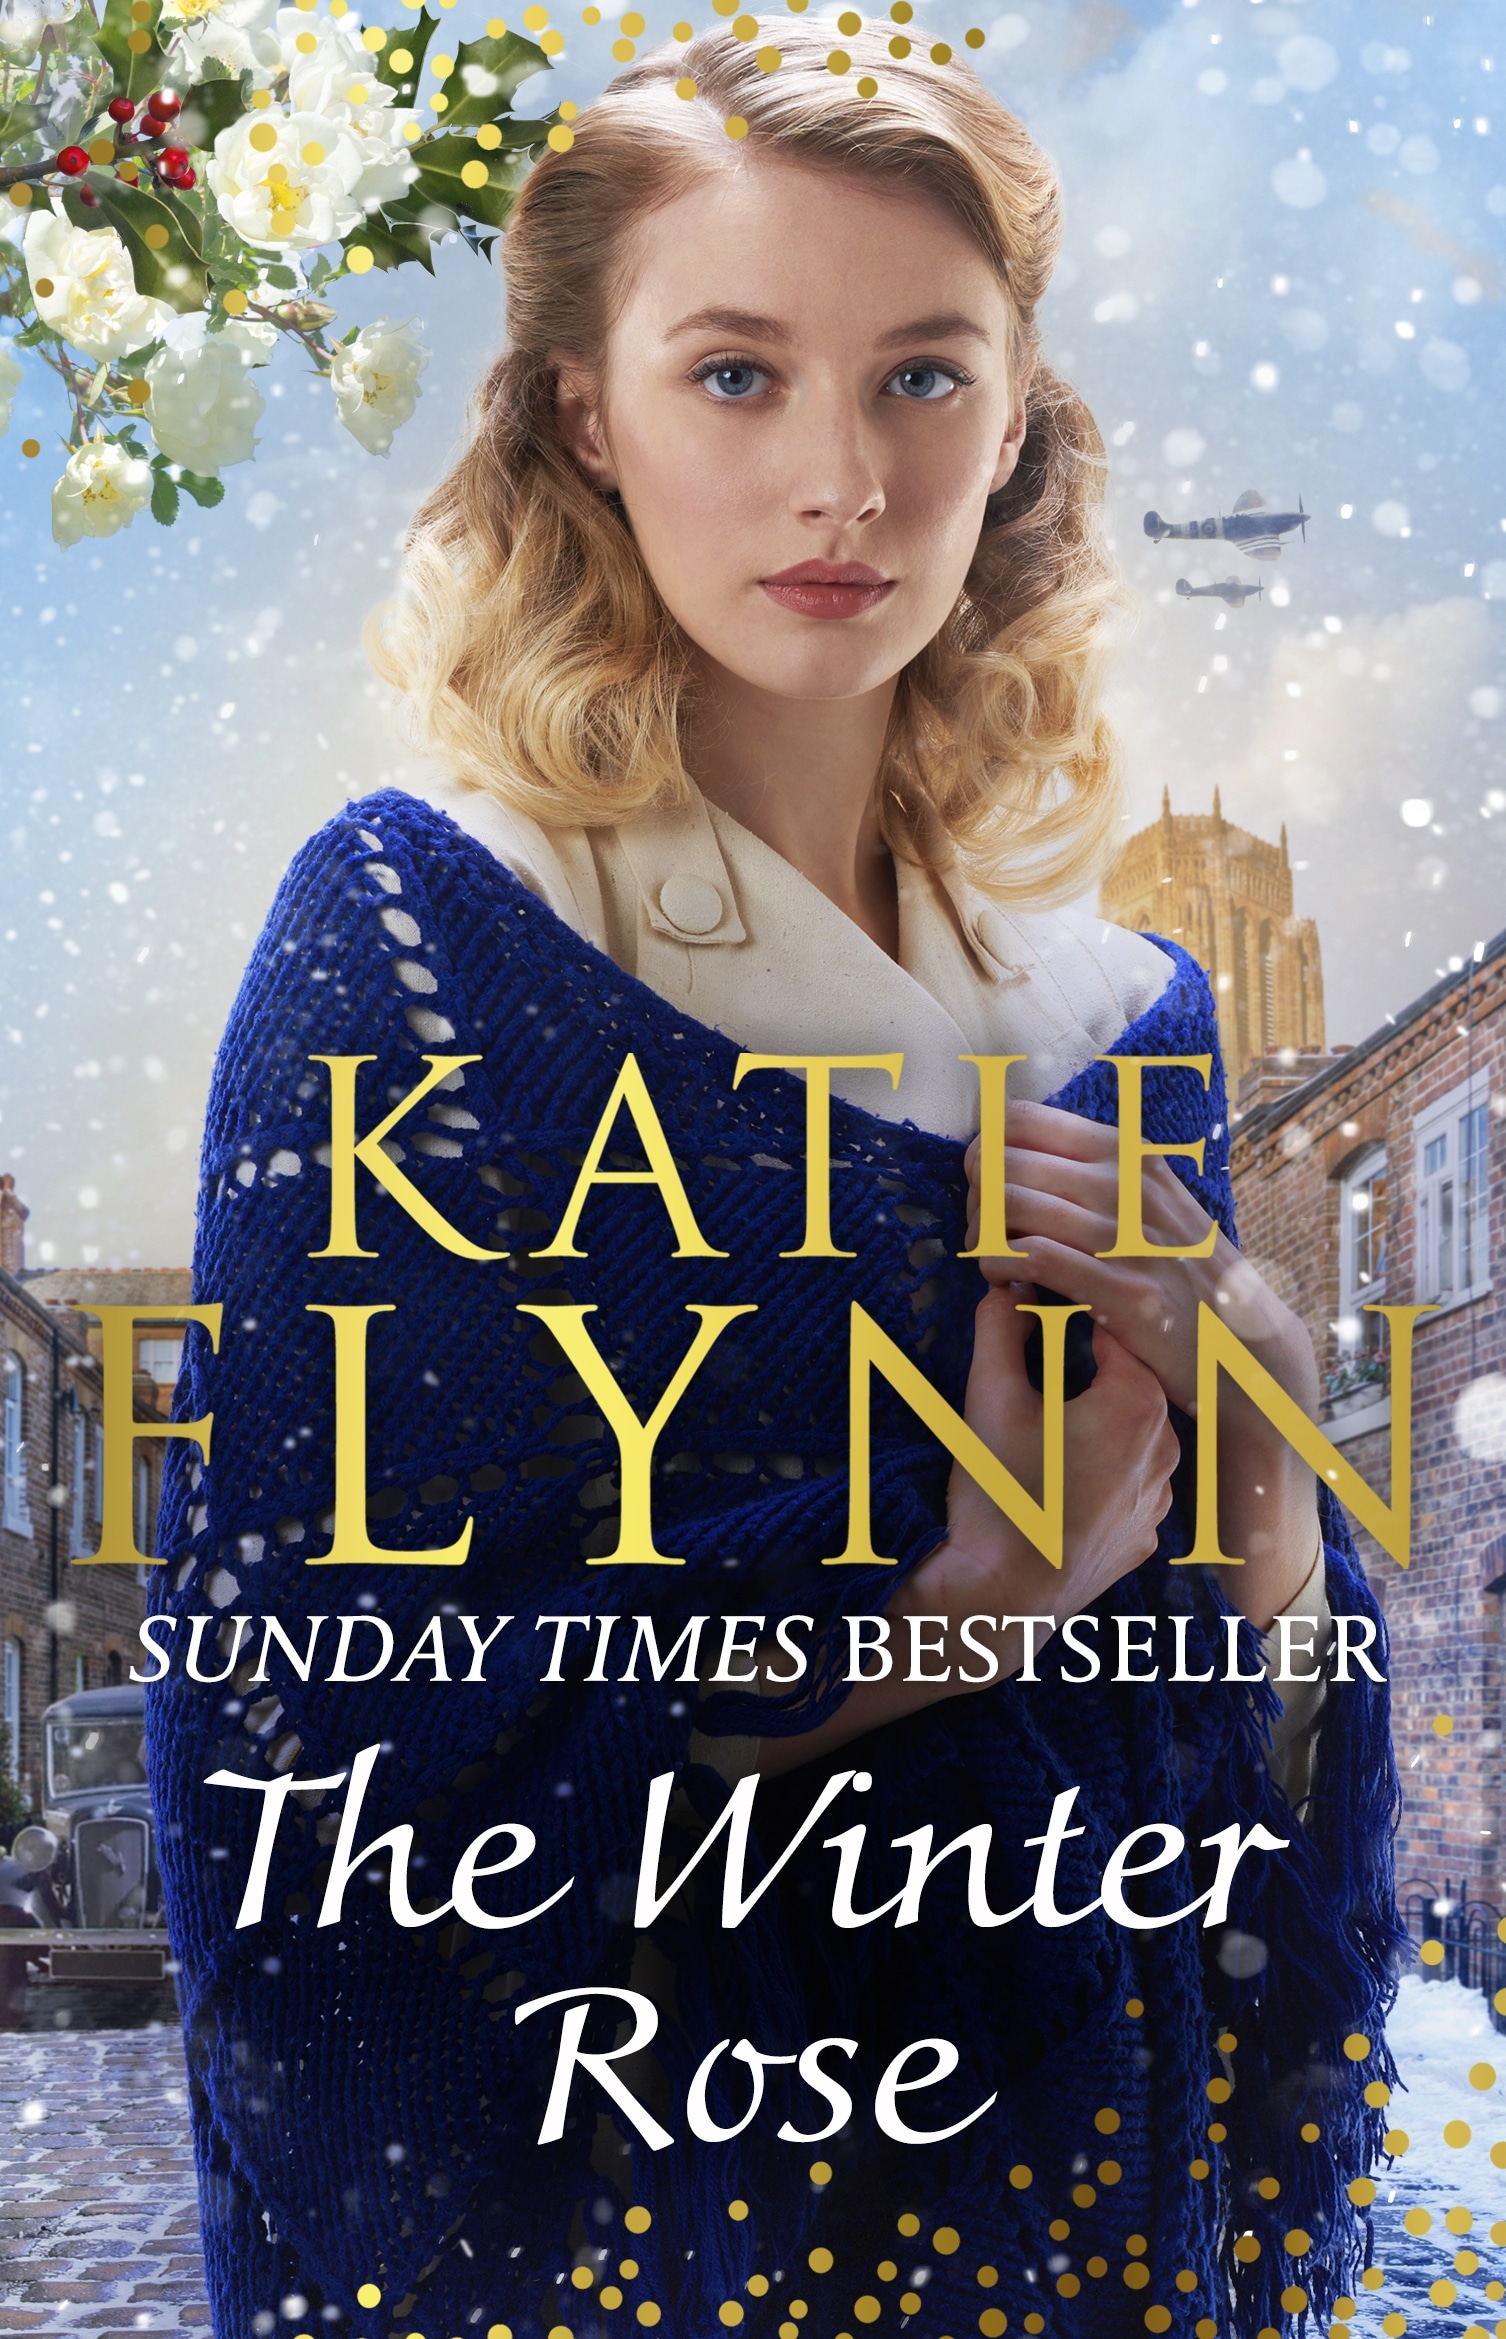 Book “The Winter Rose” by Katie Flynn — October 27, 2022